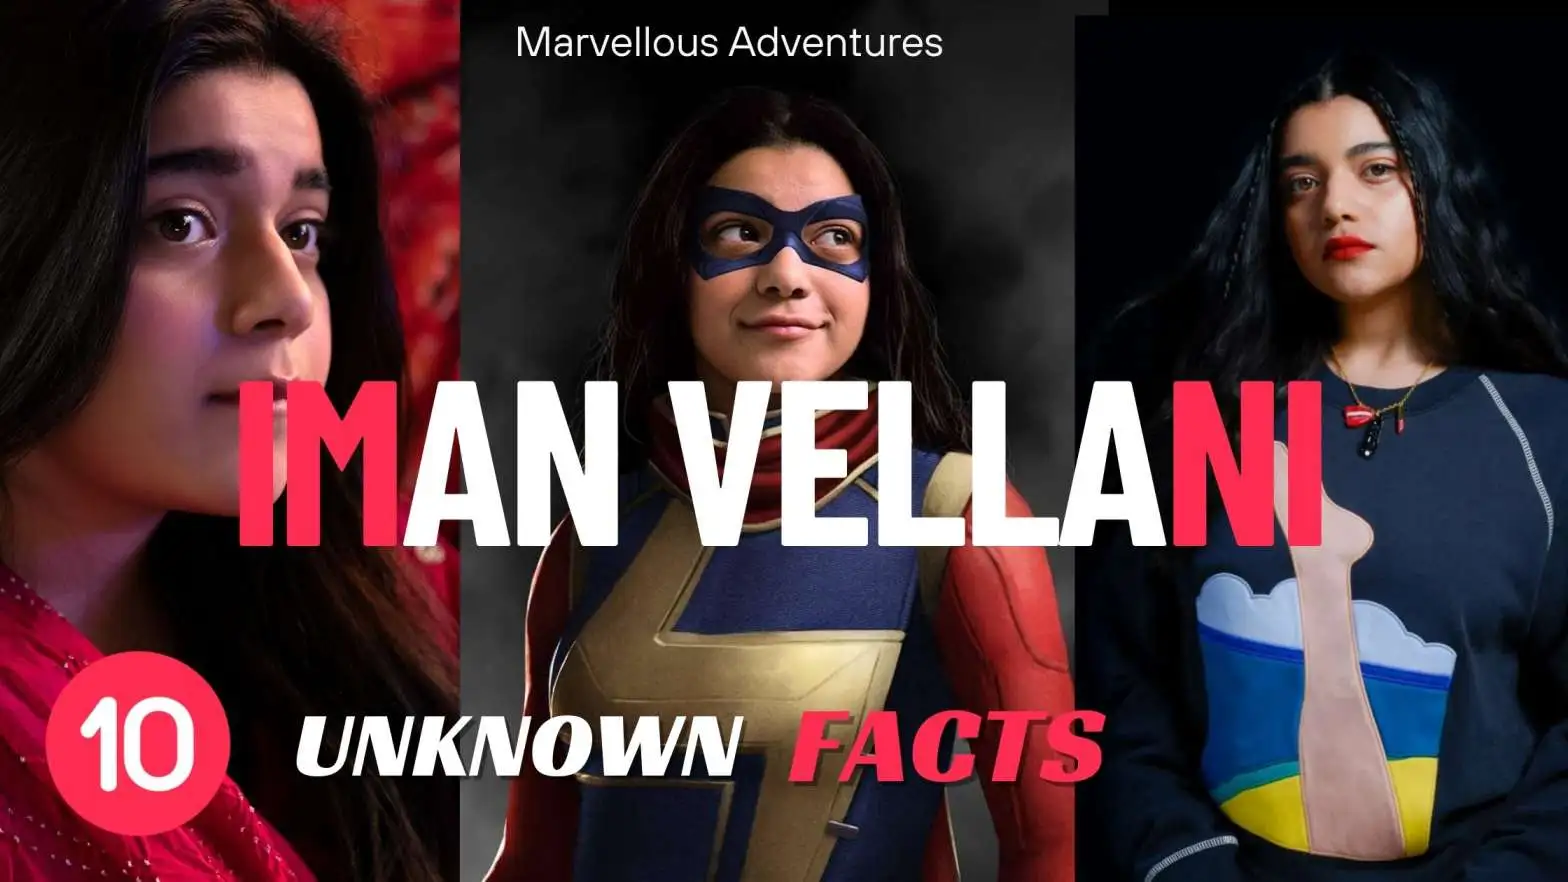 Iman Vellani: 10 facts about the Marvel actress you need